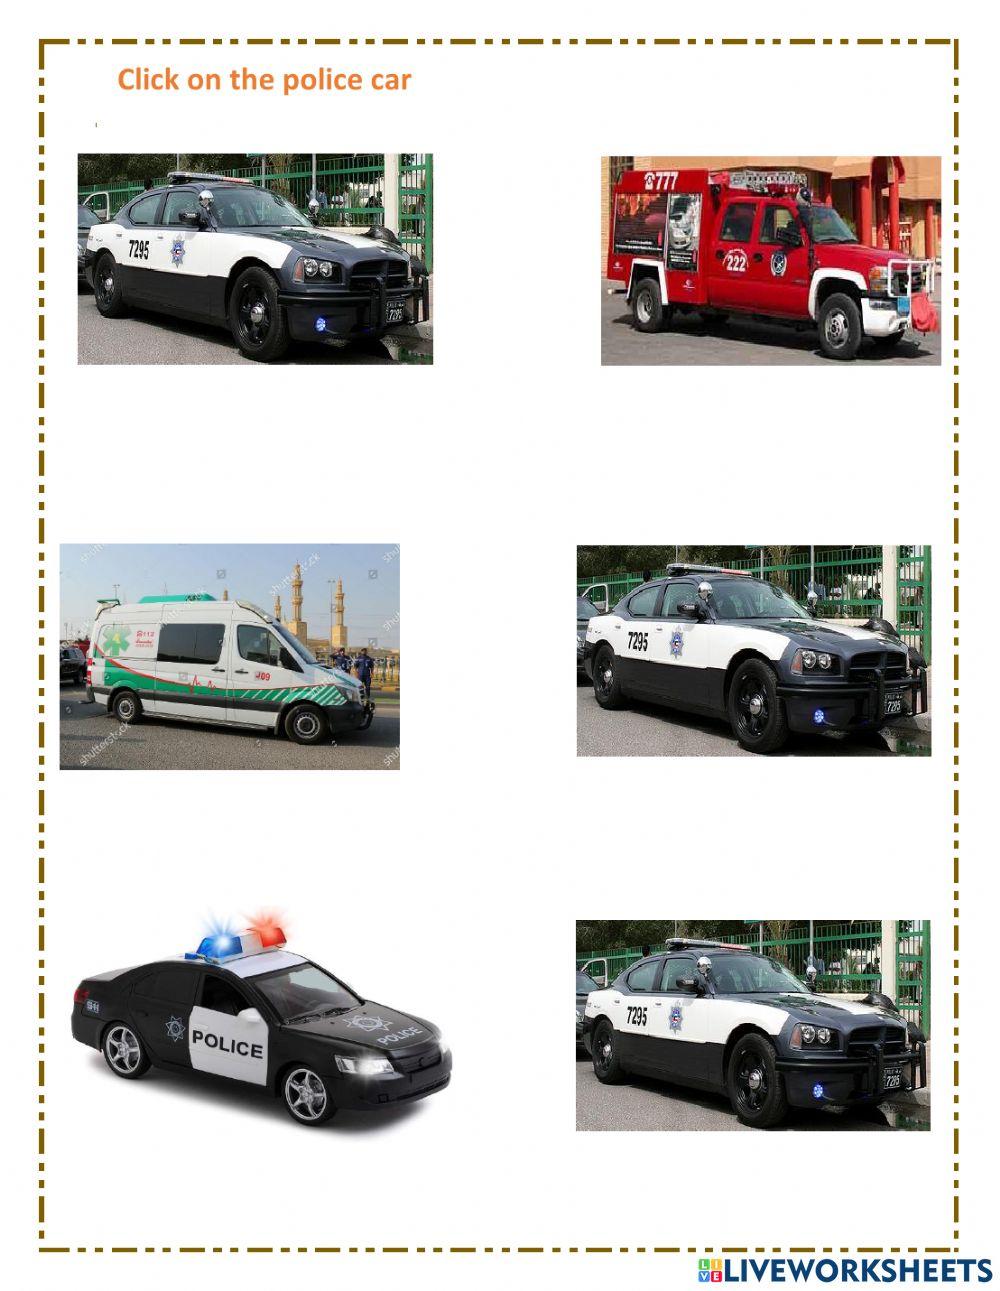 Click on police car